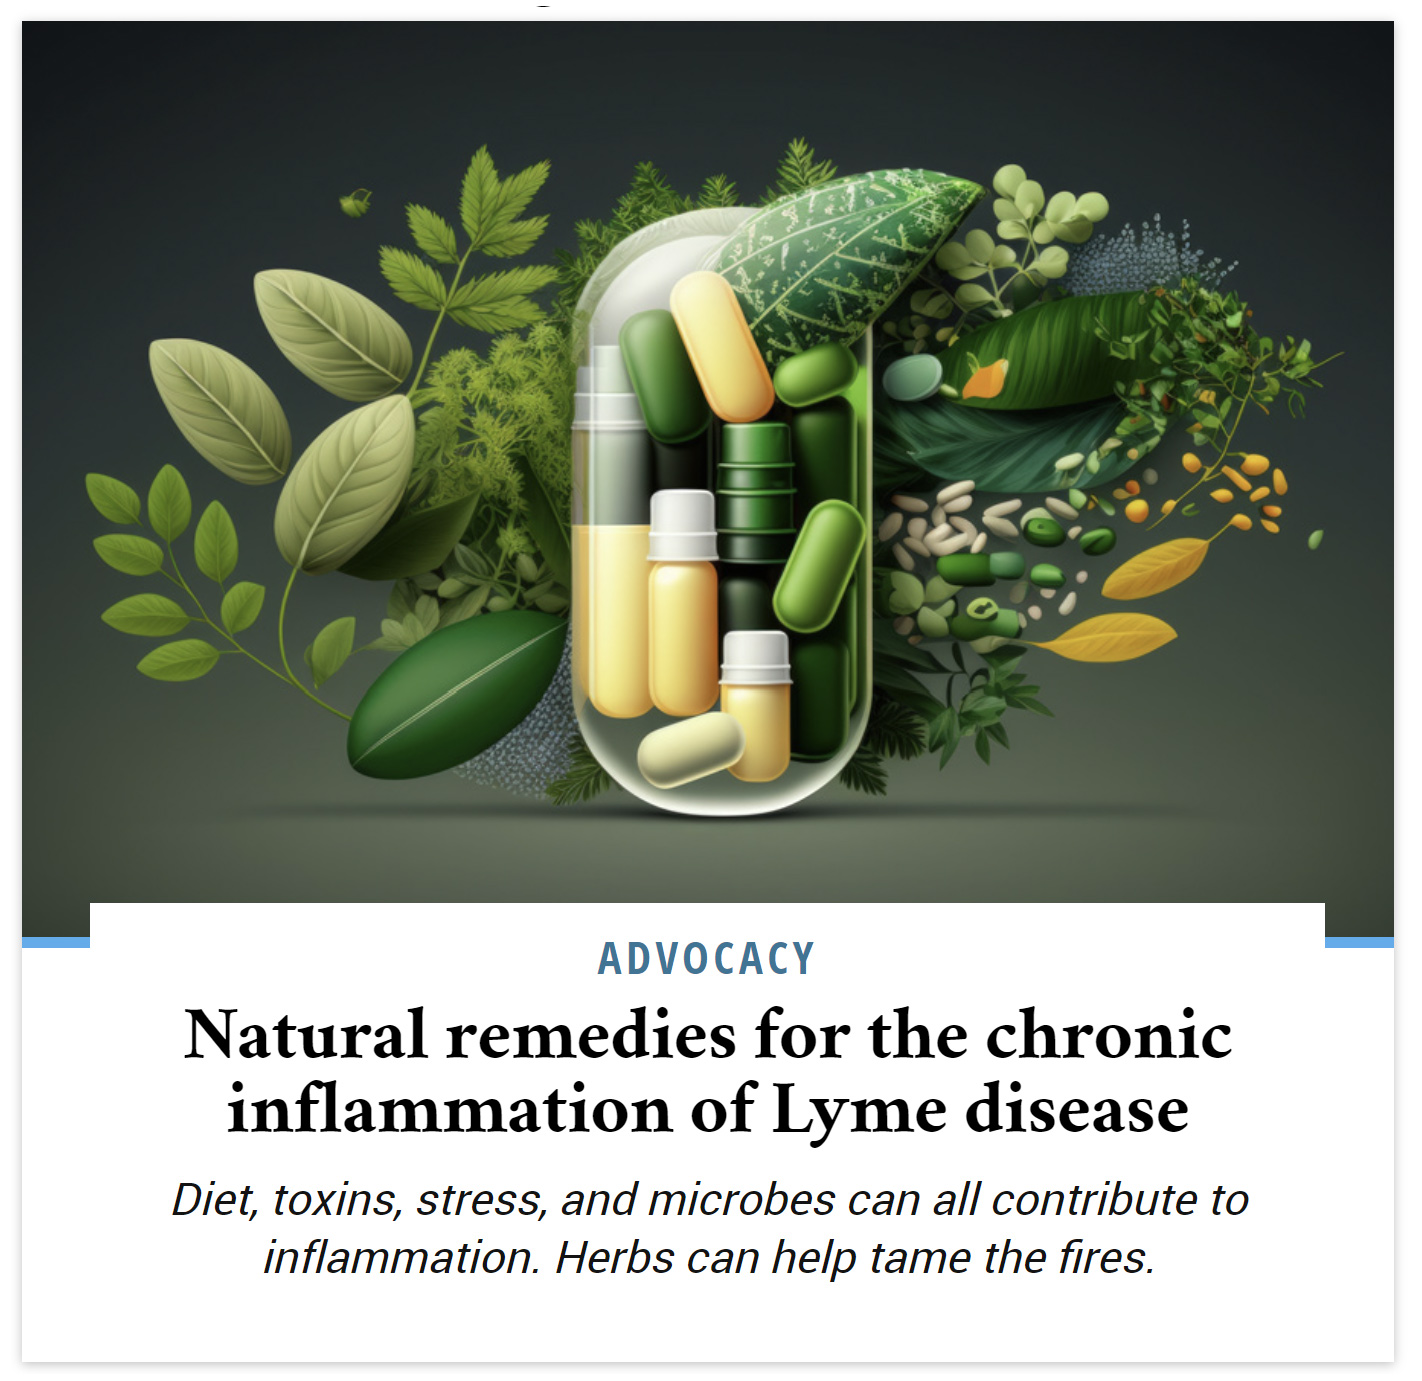 Natural remedies for the chronic inflammation of Lyme disease